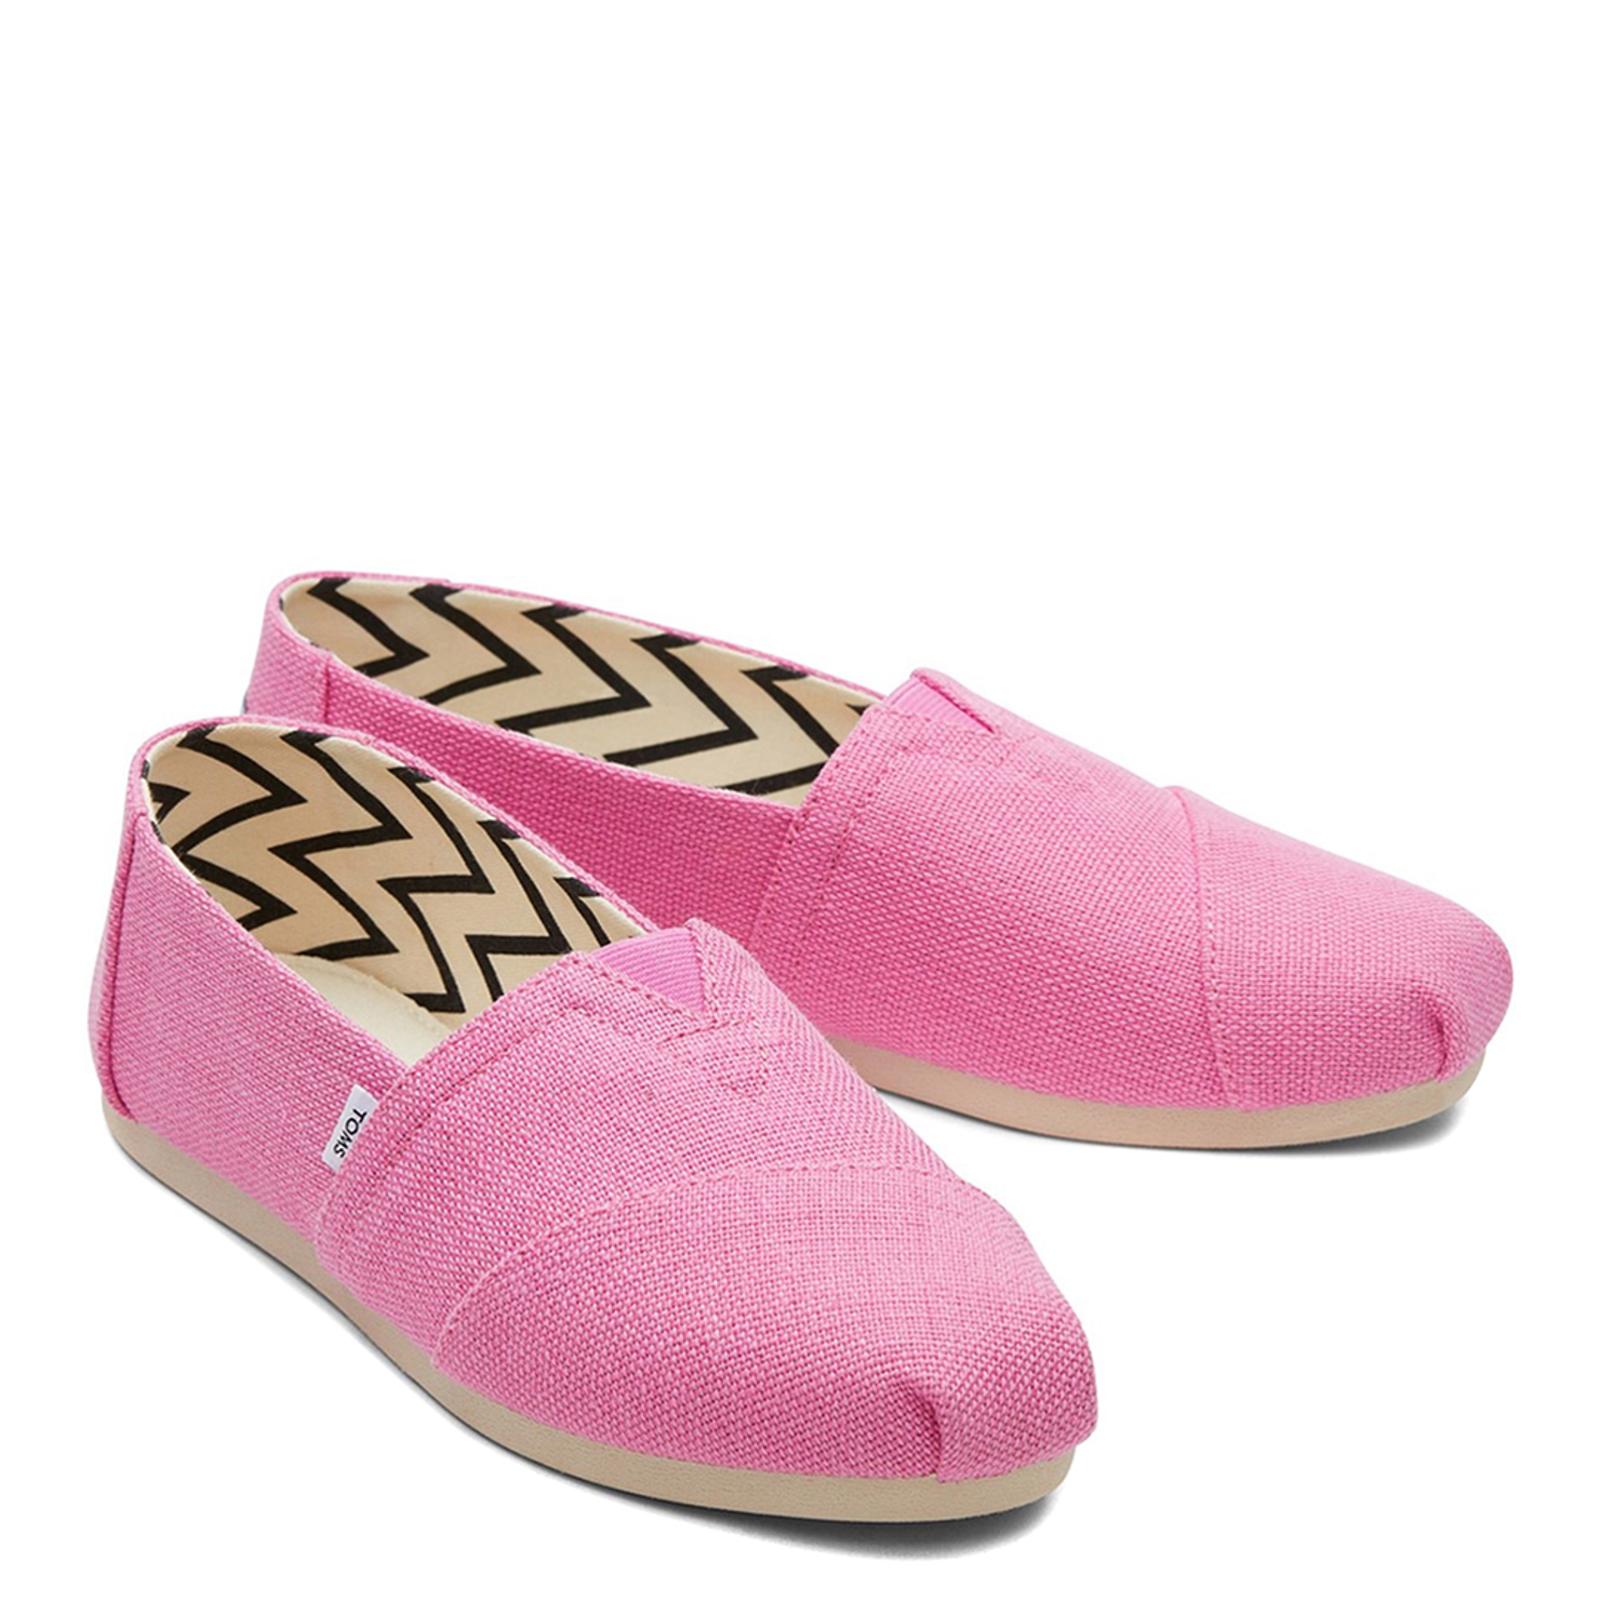 36987-69080 PINK Flat Shoes - BrandAlley